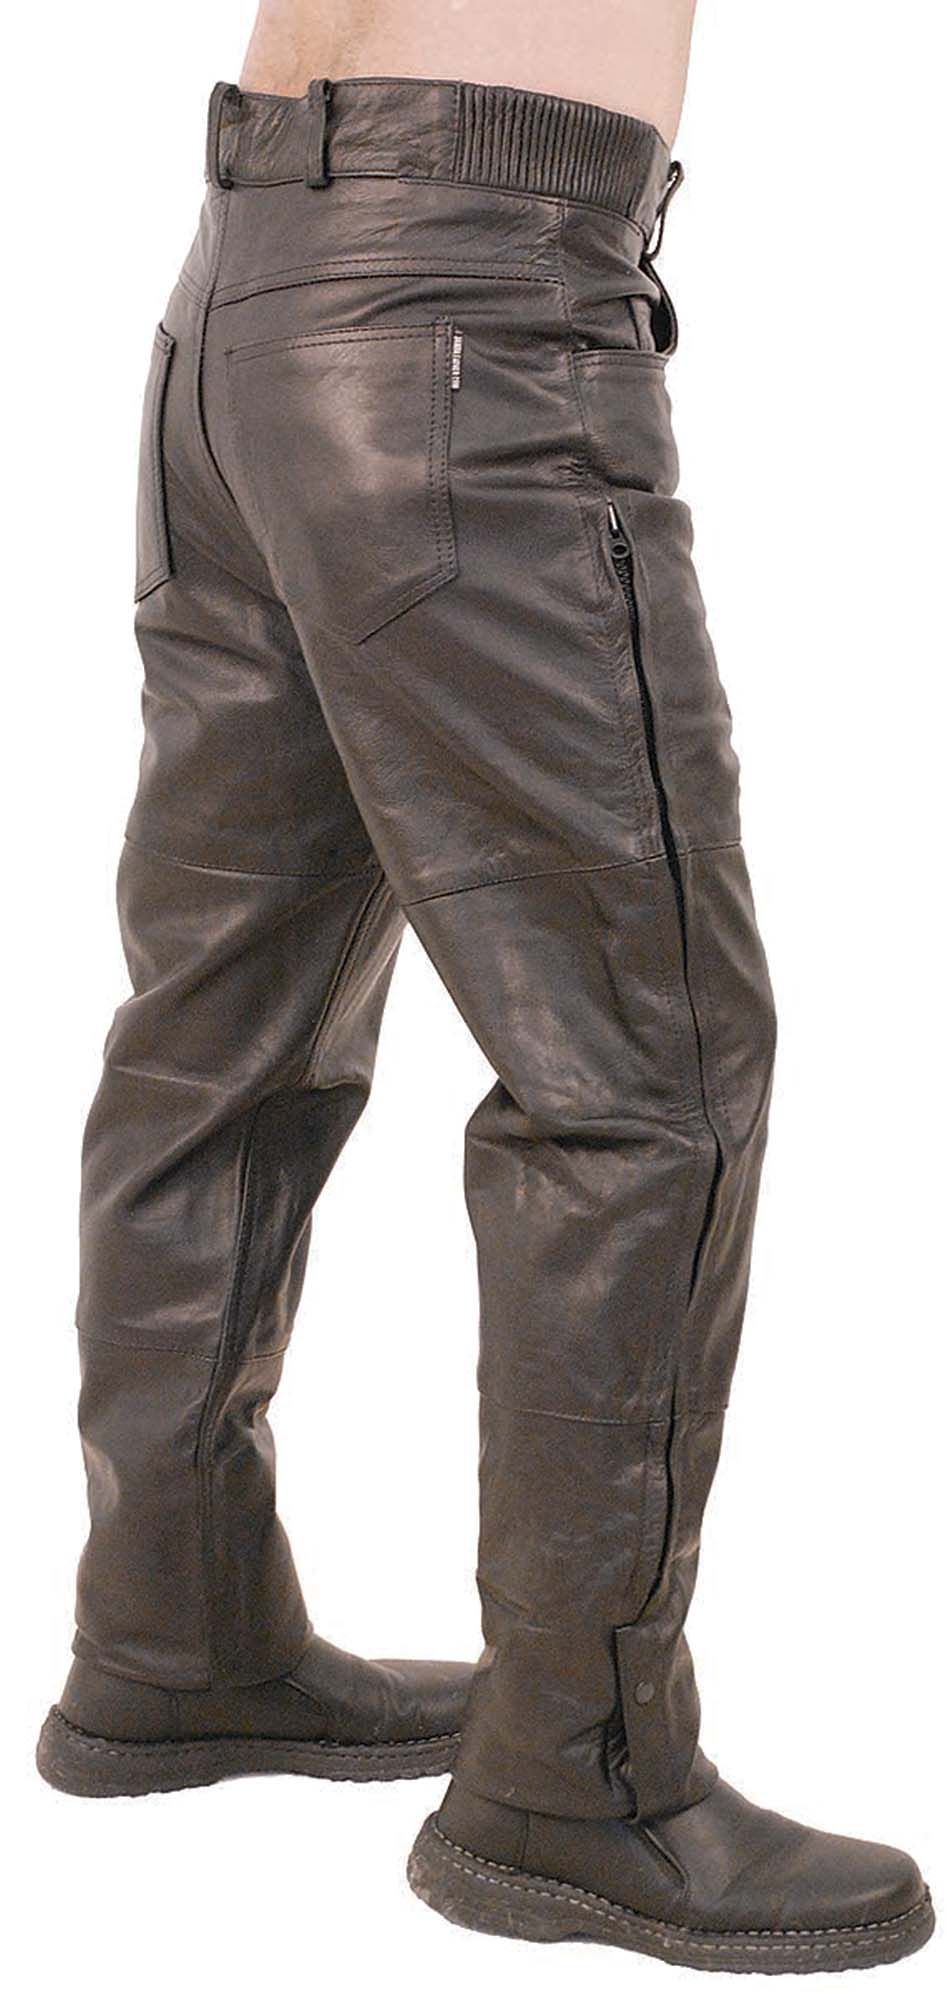 Rider wearing leather motorcycle pants with stretch sides